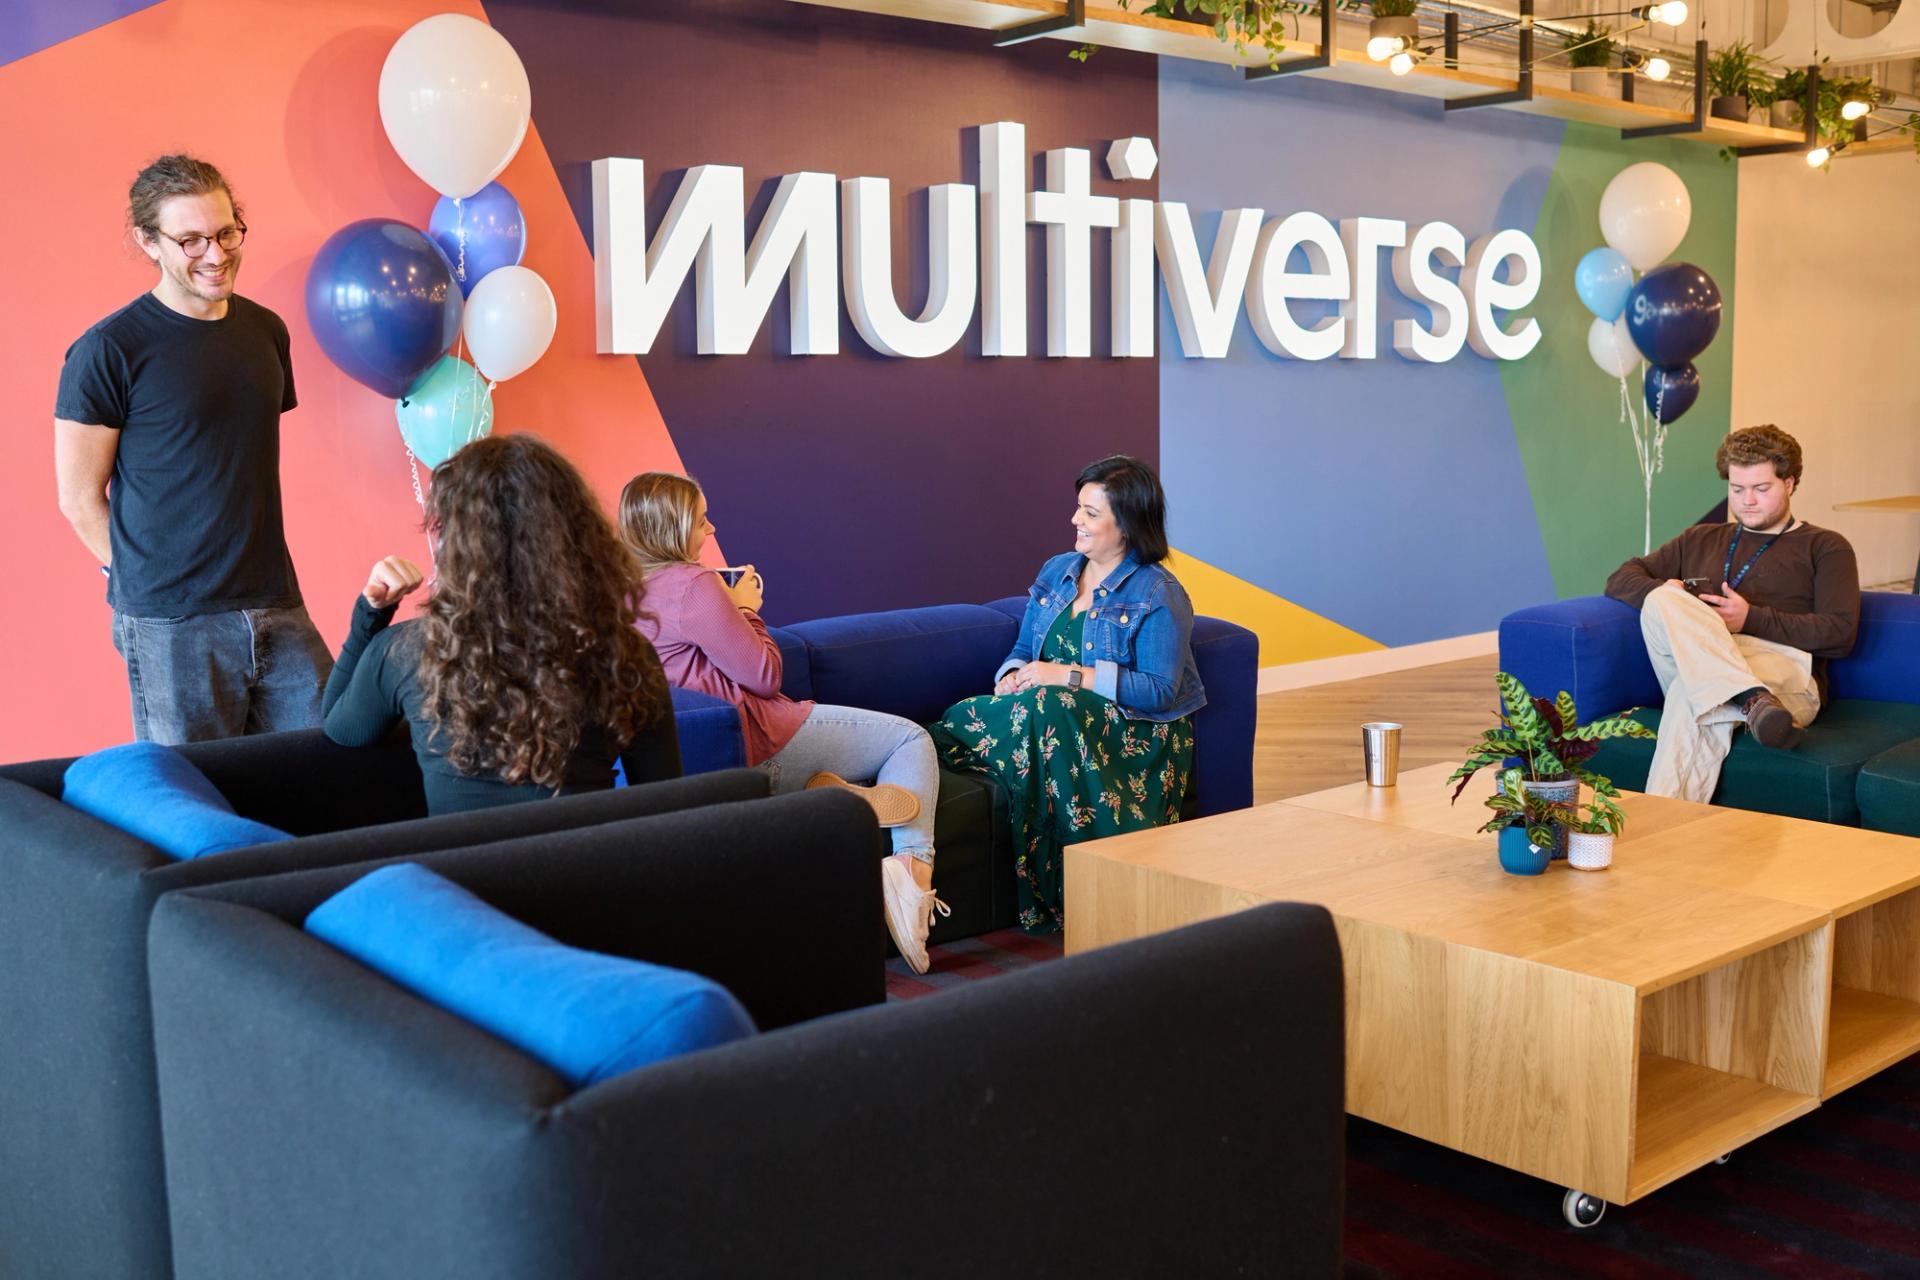 Employees chatting in a breakout space with large Multiverse Branding